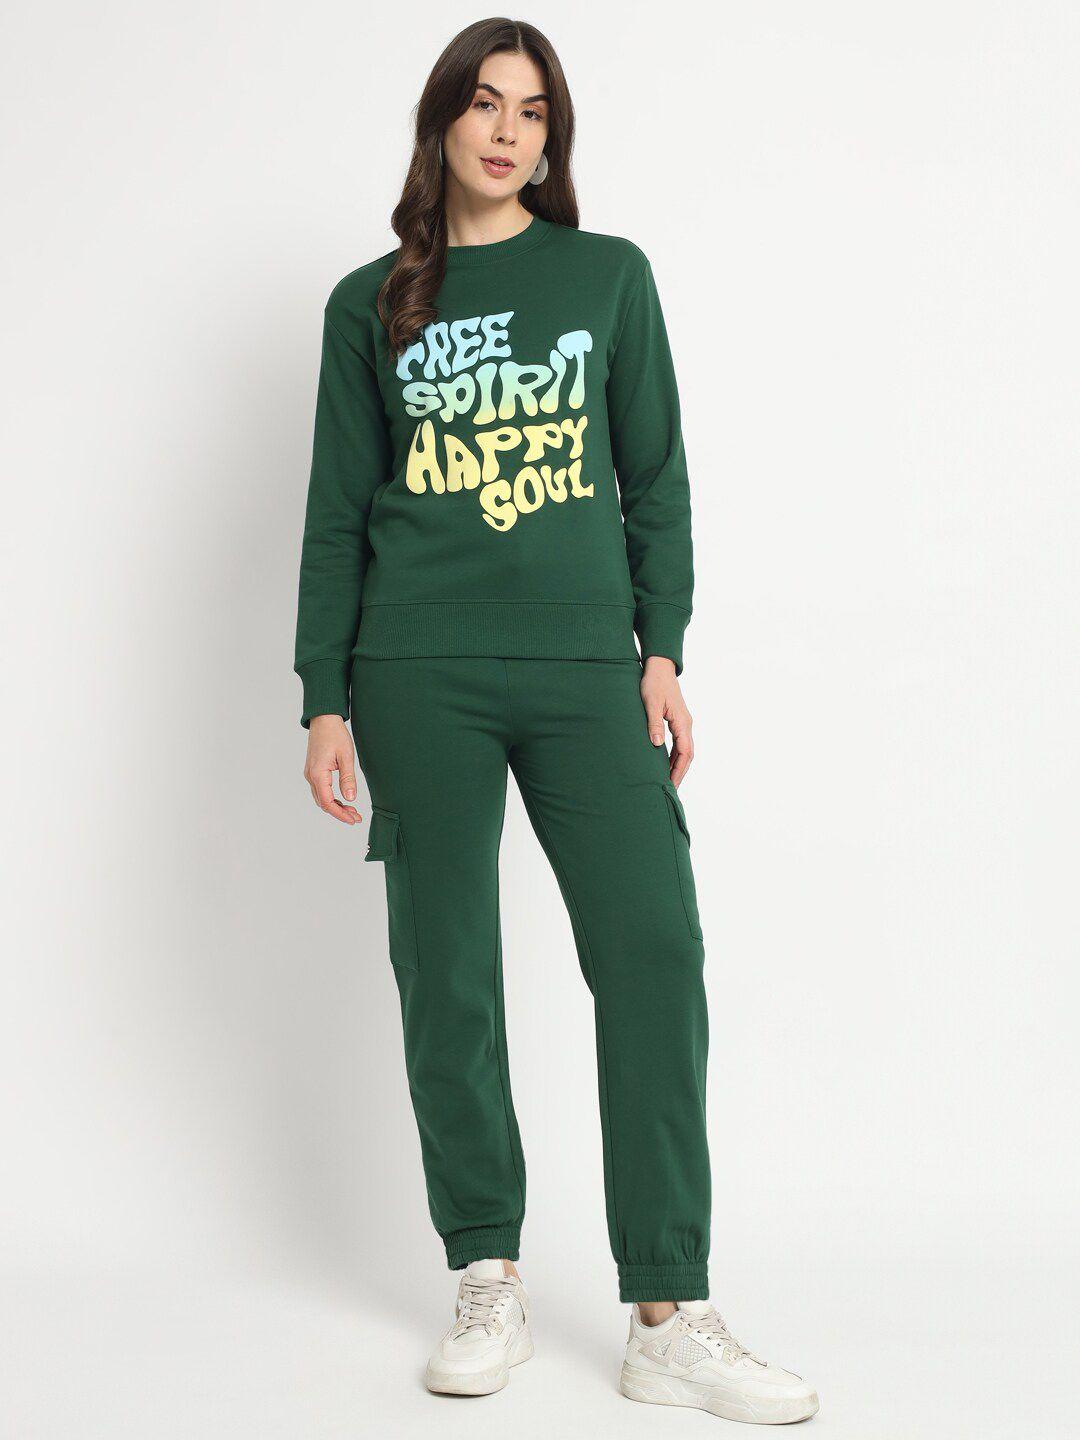 vividartsy printed pure cotton sweatshirt with trousers co-ords